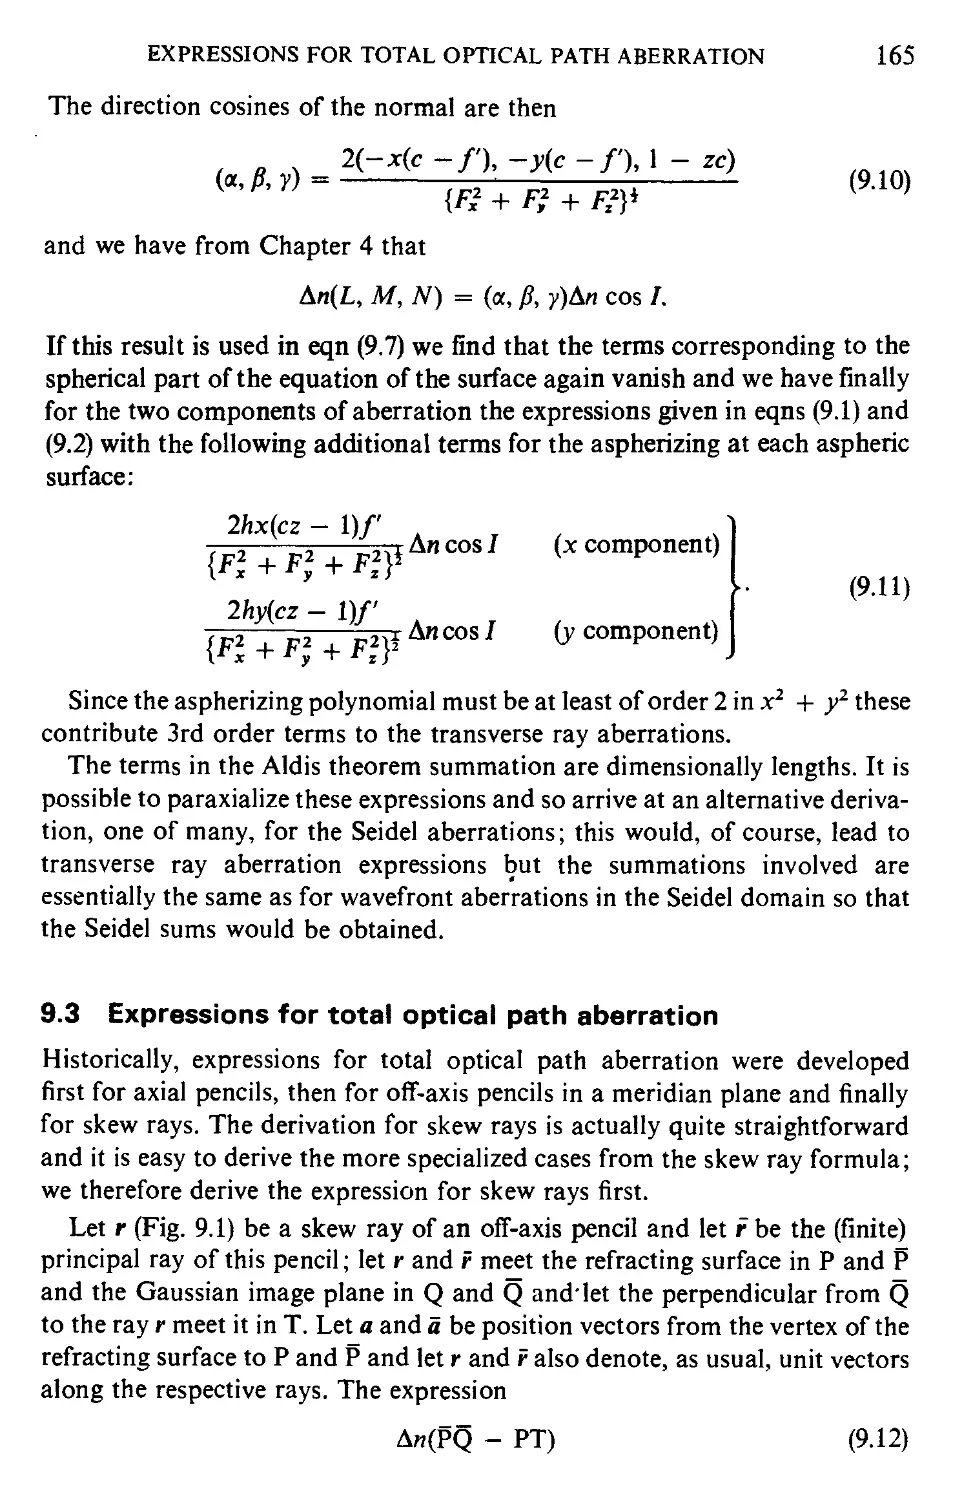 9.3 Expressions for total optical path aberration